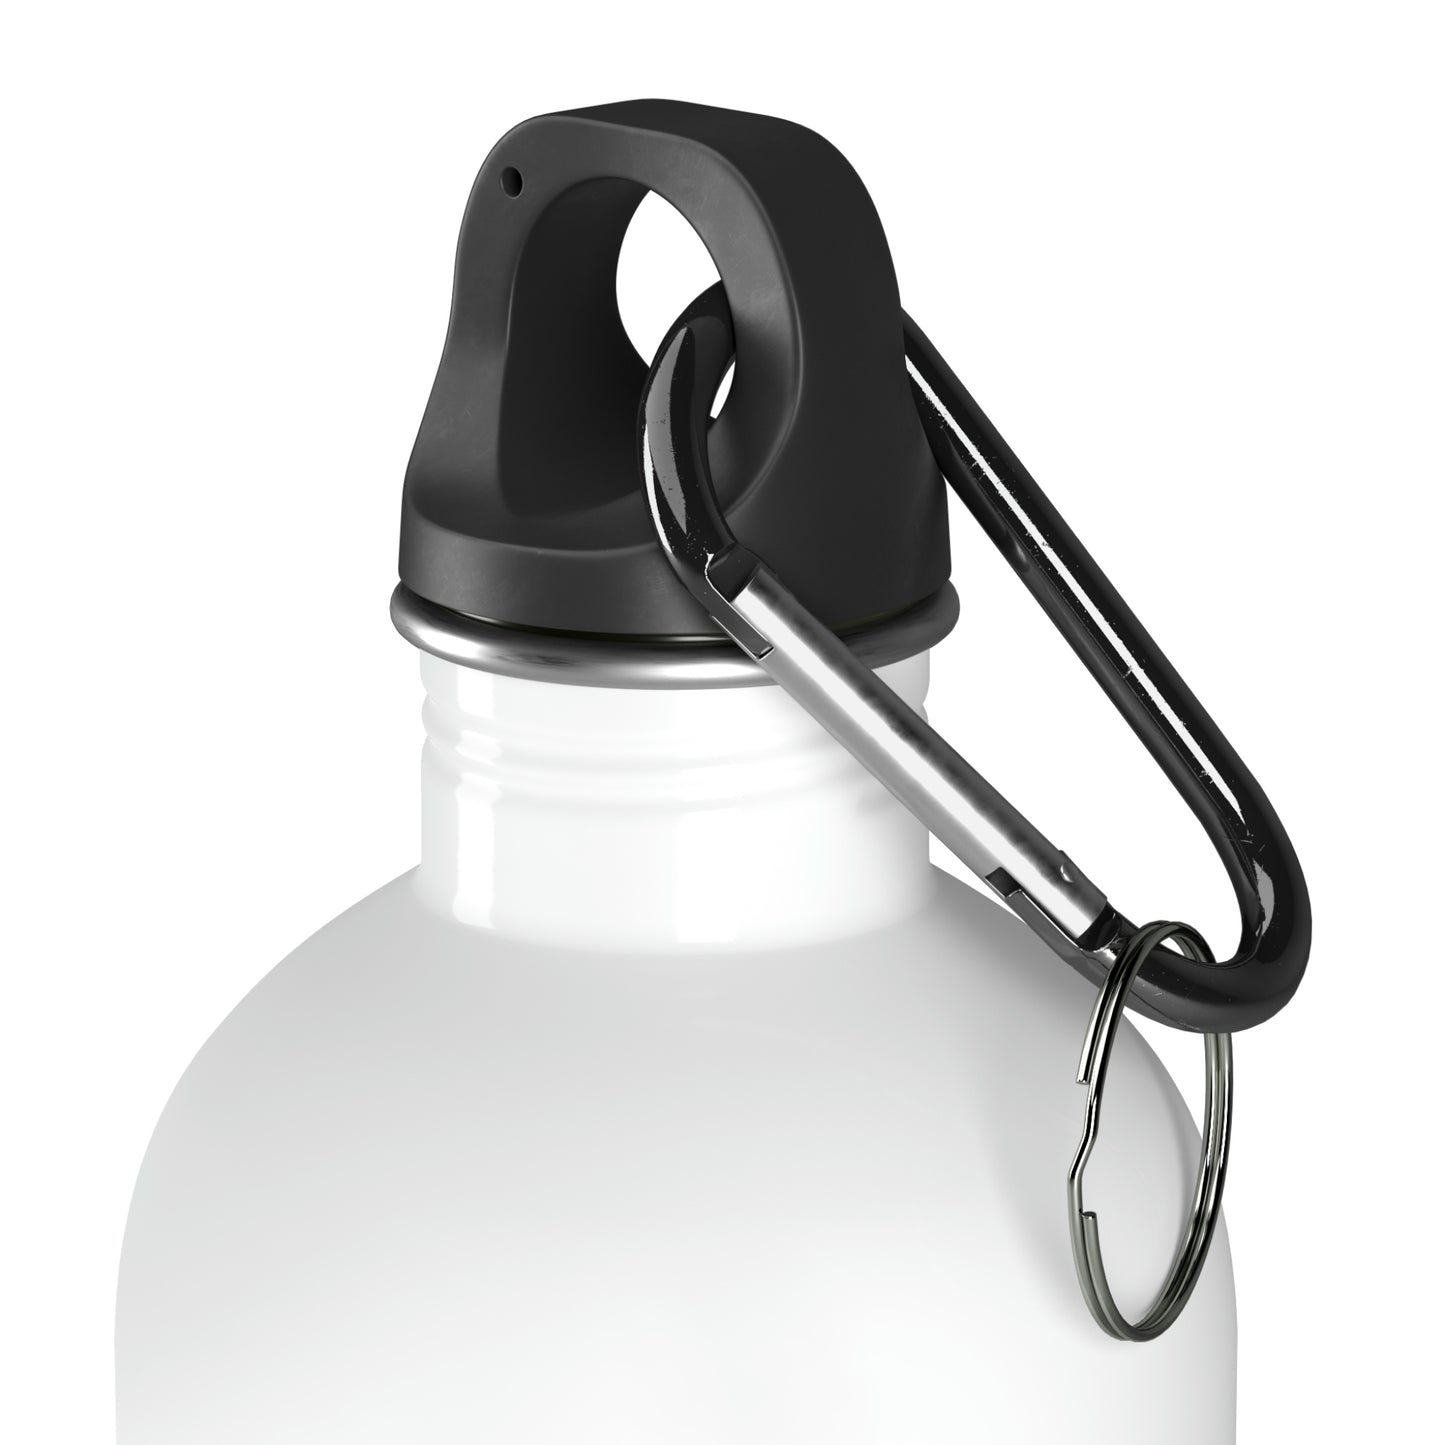 Never Give Up - Stainless Steel Water Bottle